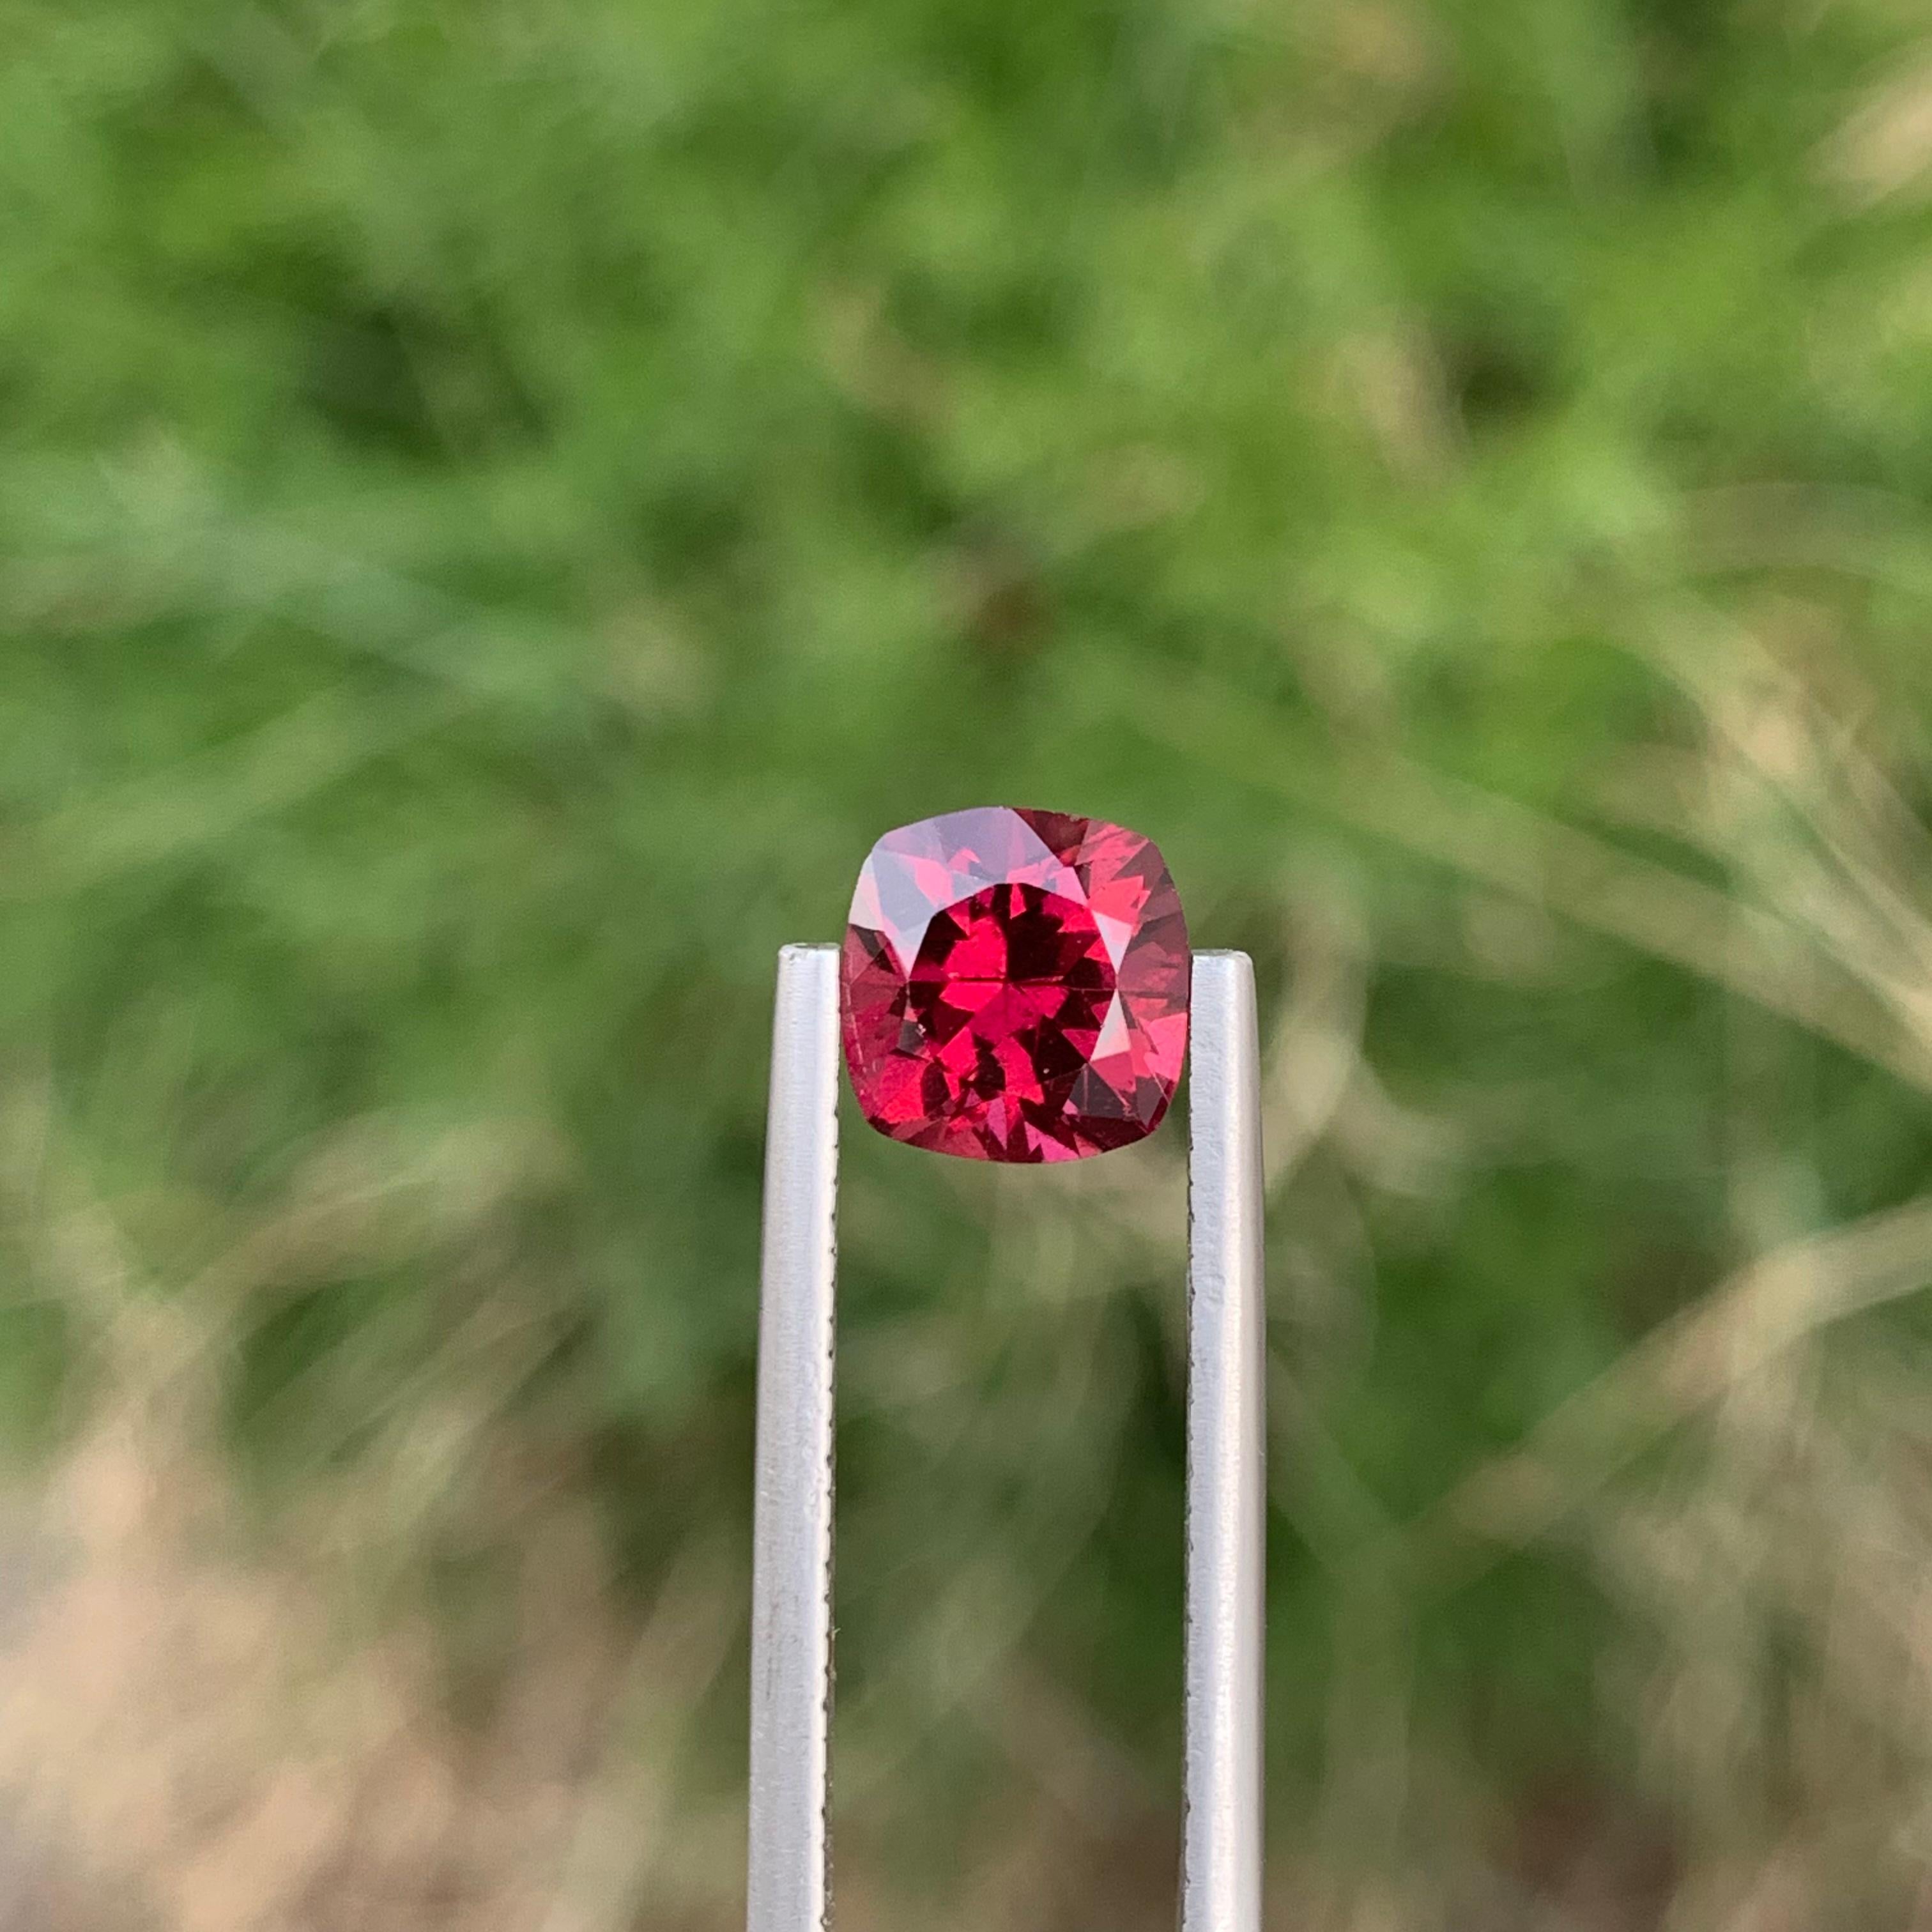 Faceted Rhodolite Garnet
Weight: 2.25 Carats 
Dimension: 7.6x7.4x5.1 Mm
Origin: Madagascar Africa 
Color: Red
Shape: Cushion
Certificate: On Customer Demand 
.
Rhodolite garnet, a striking gemstone that combines shades of pink and violet, is